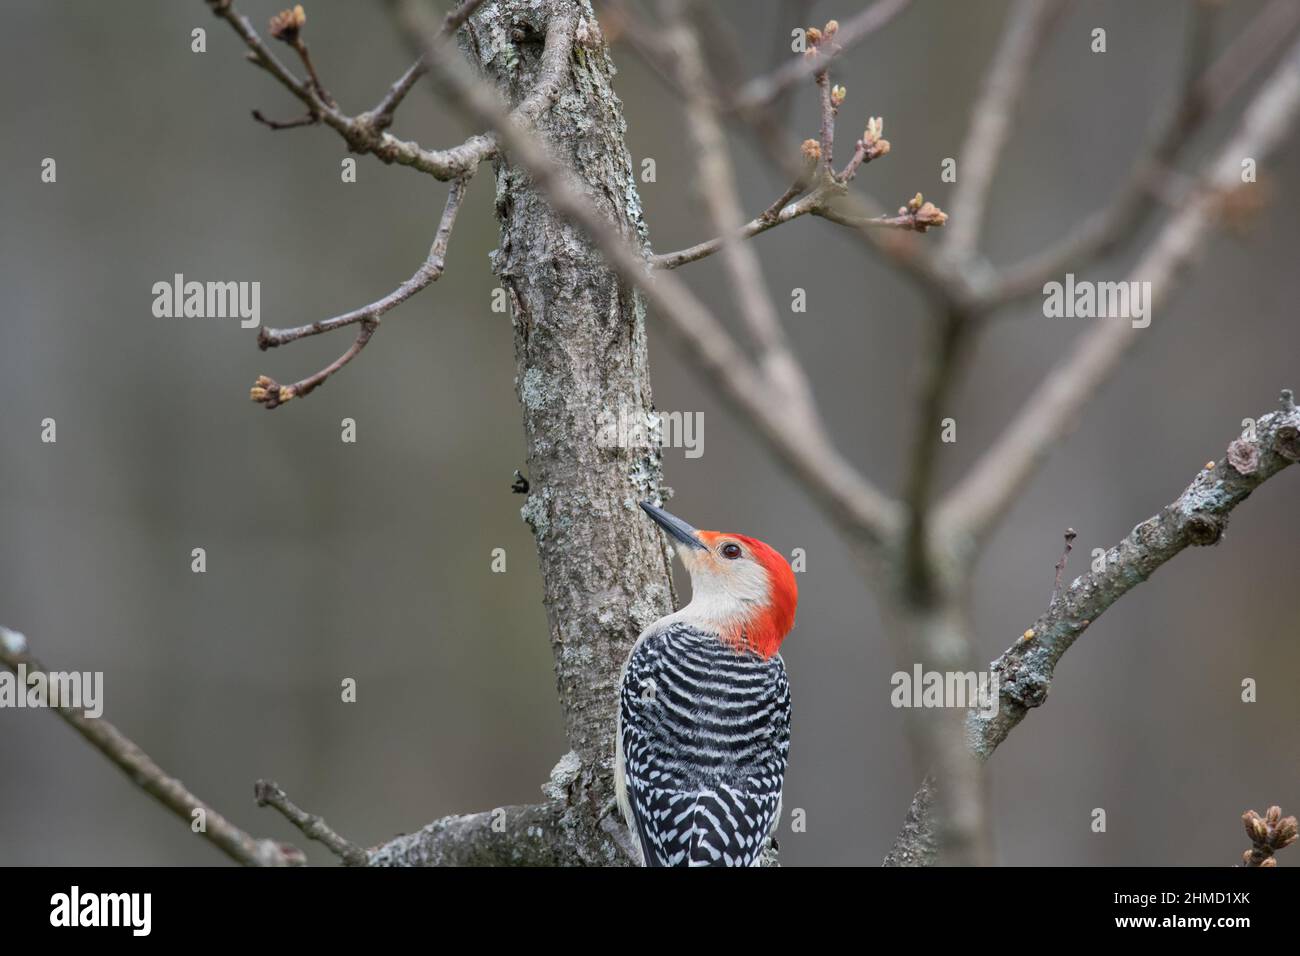 Red-Bellied Woodpecker climbing along a tree Stock Photo